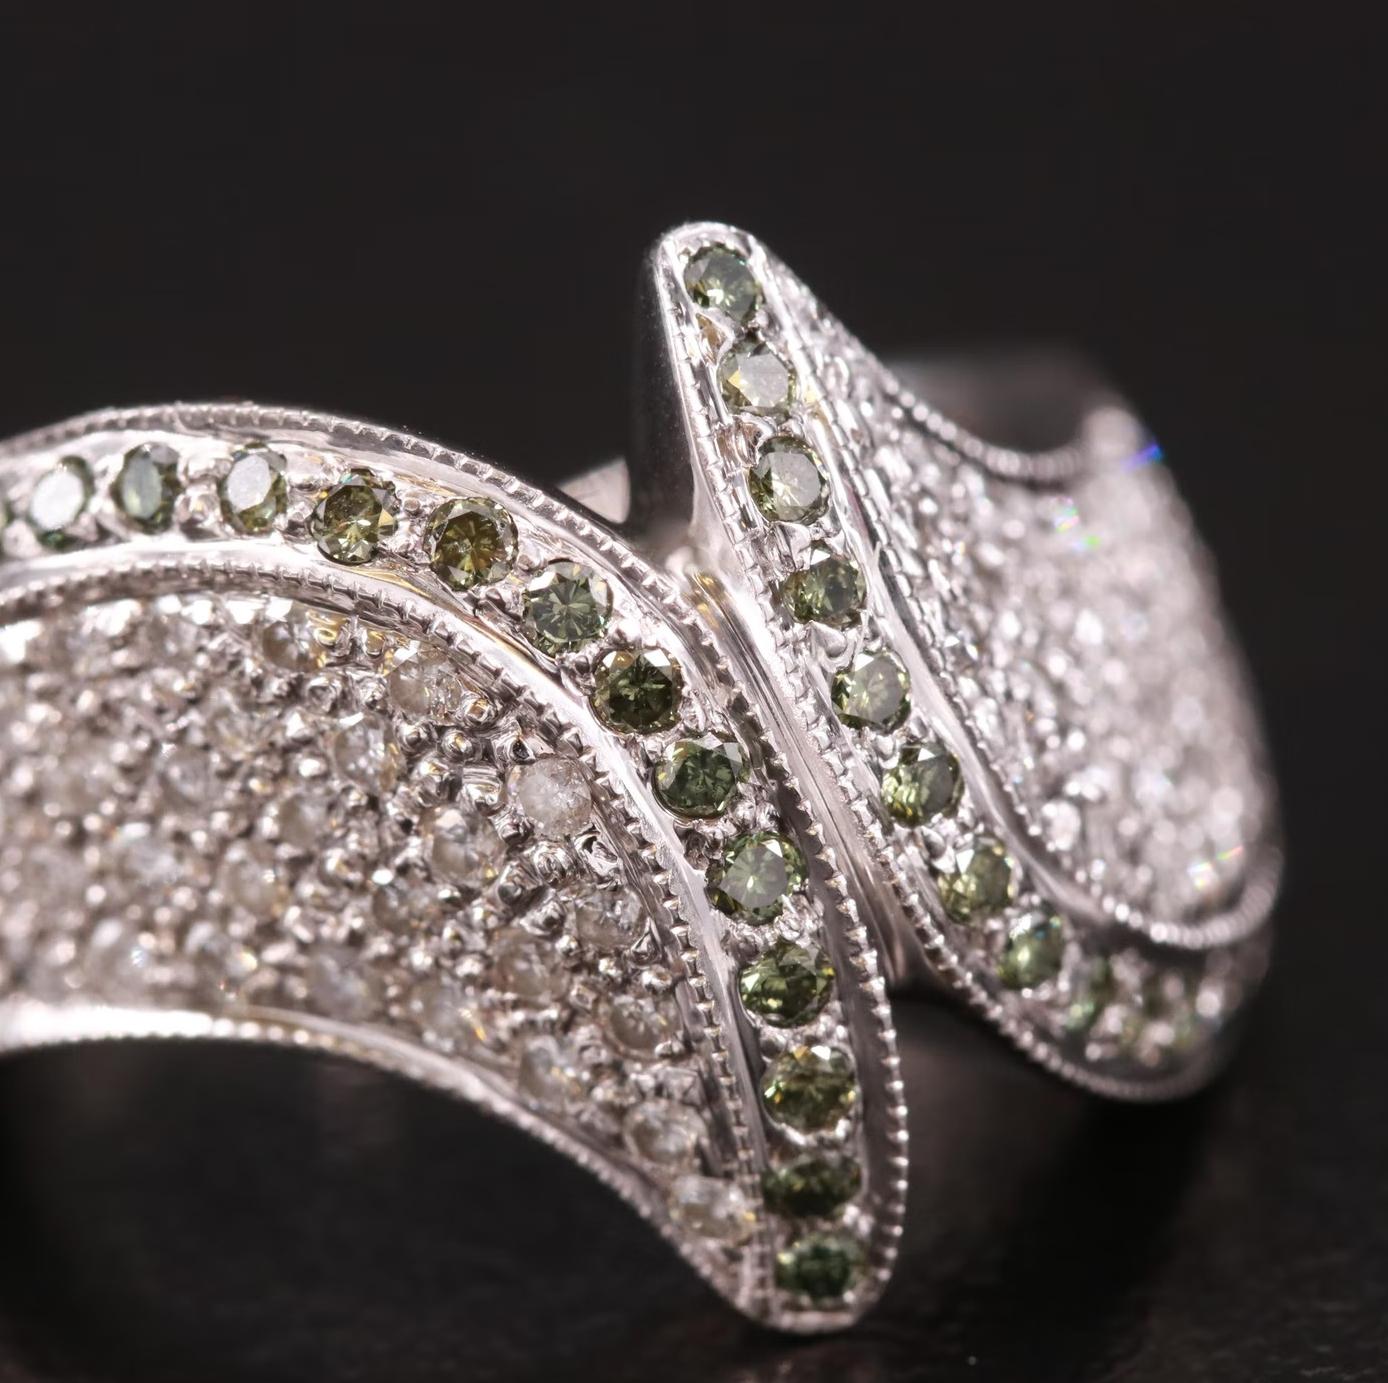 Sonia B ring, stamped and hallmarked SNB

NEW WITH TAGS, Tag Price $4950

Amazing Bypass design

Heavy and well made, 7.8 grams

1.35 CWT Diamond, G-Fancy Green / SI Clarity / TOP QUALITY 

14K solid White gold, stamped 14K

Head turner, statement